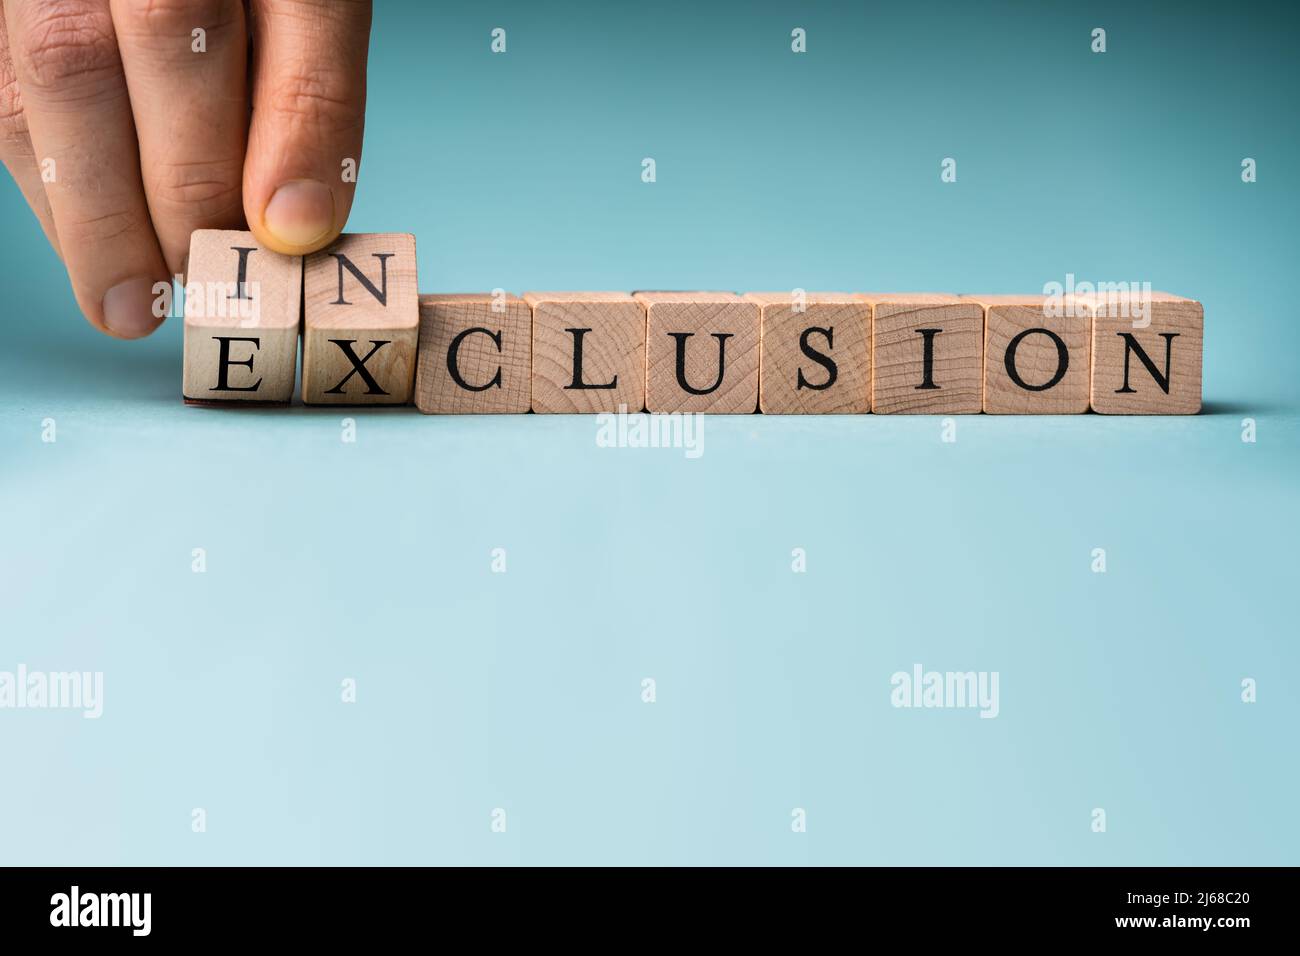 Inclusion Exclusion Word Change. Social Business Workplace Stock Photo